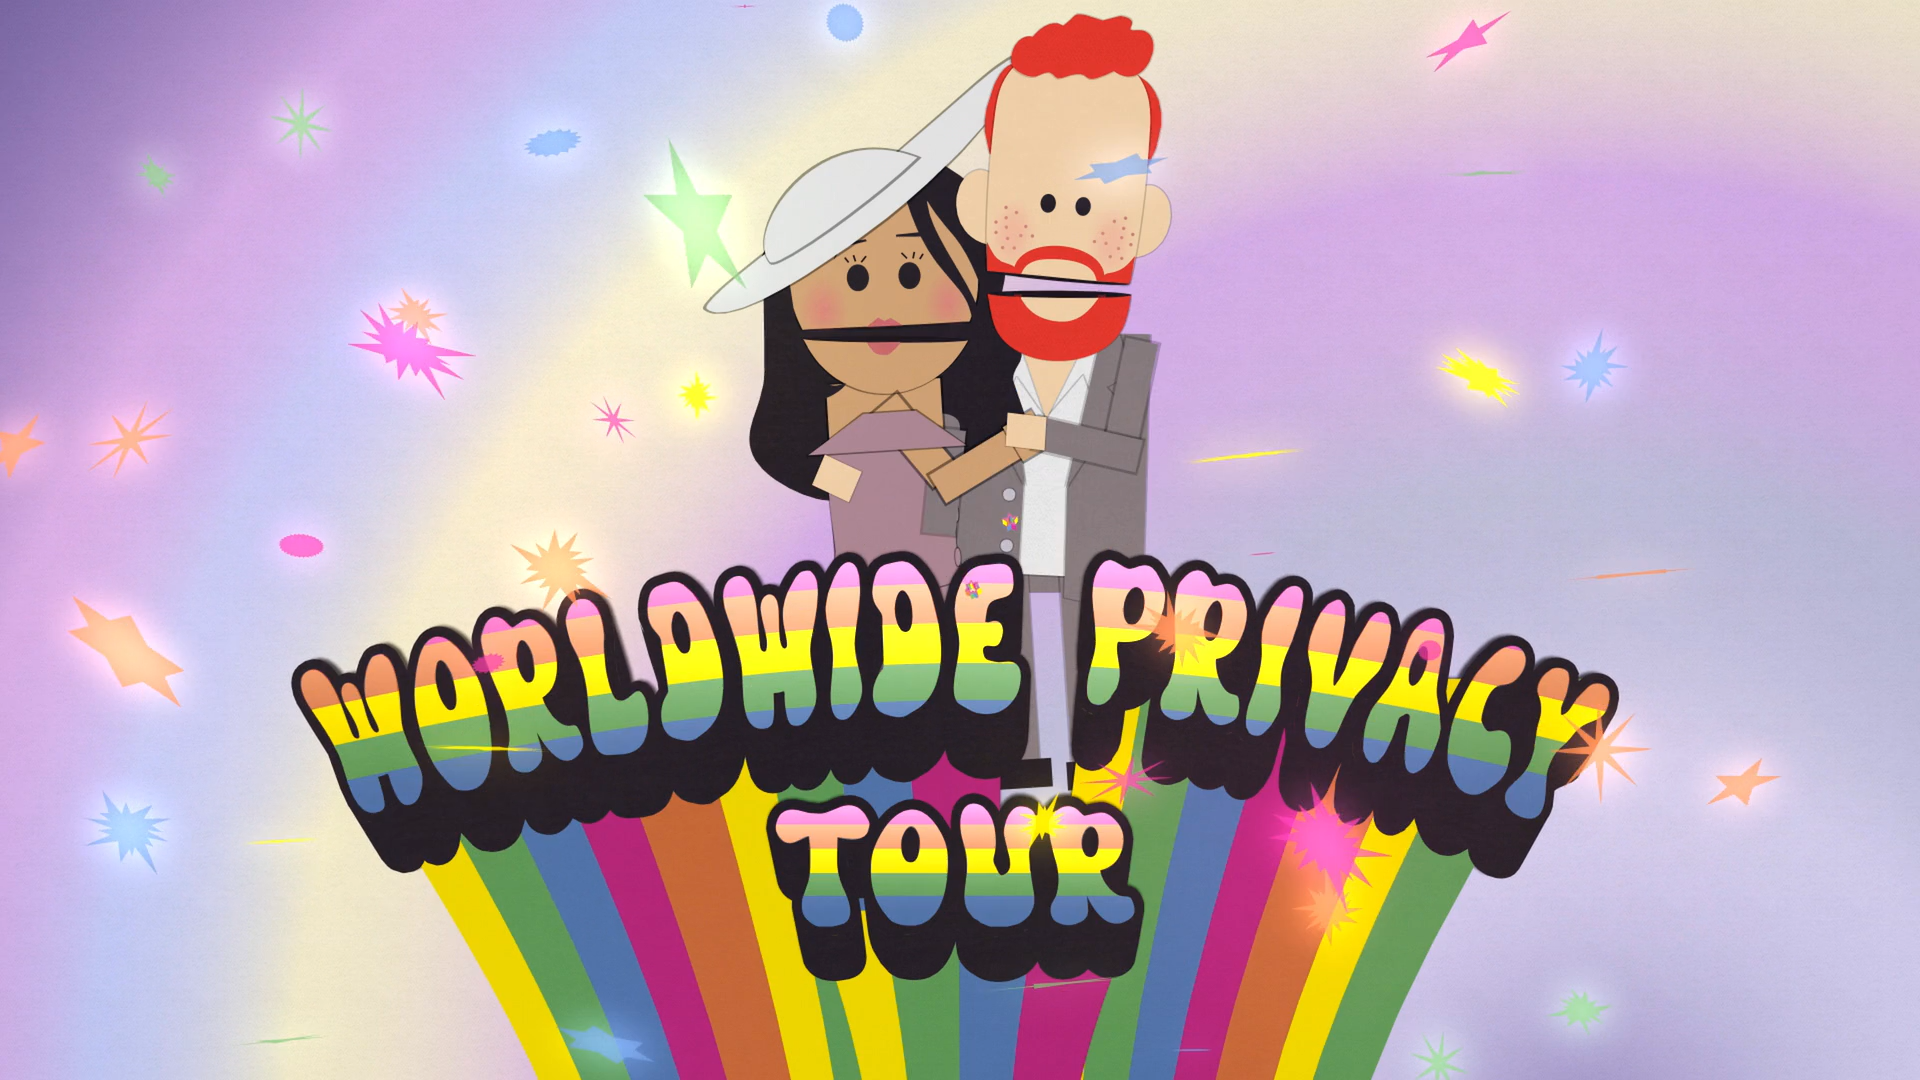 South Park, 'The Worldwide Privacy Tour